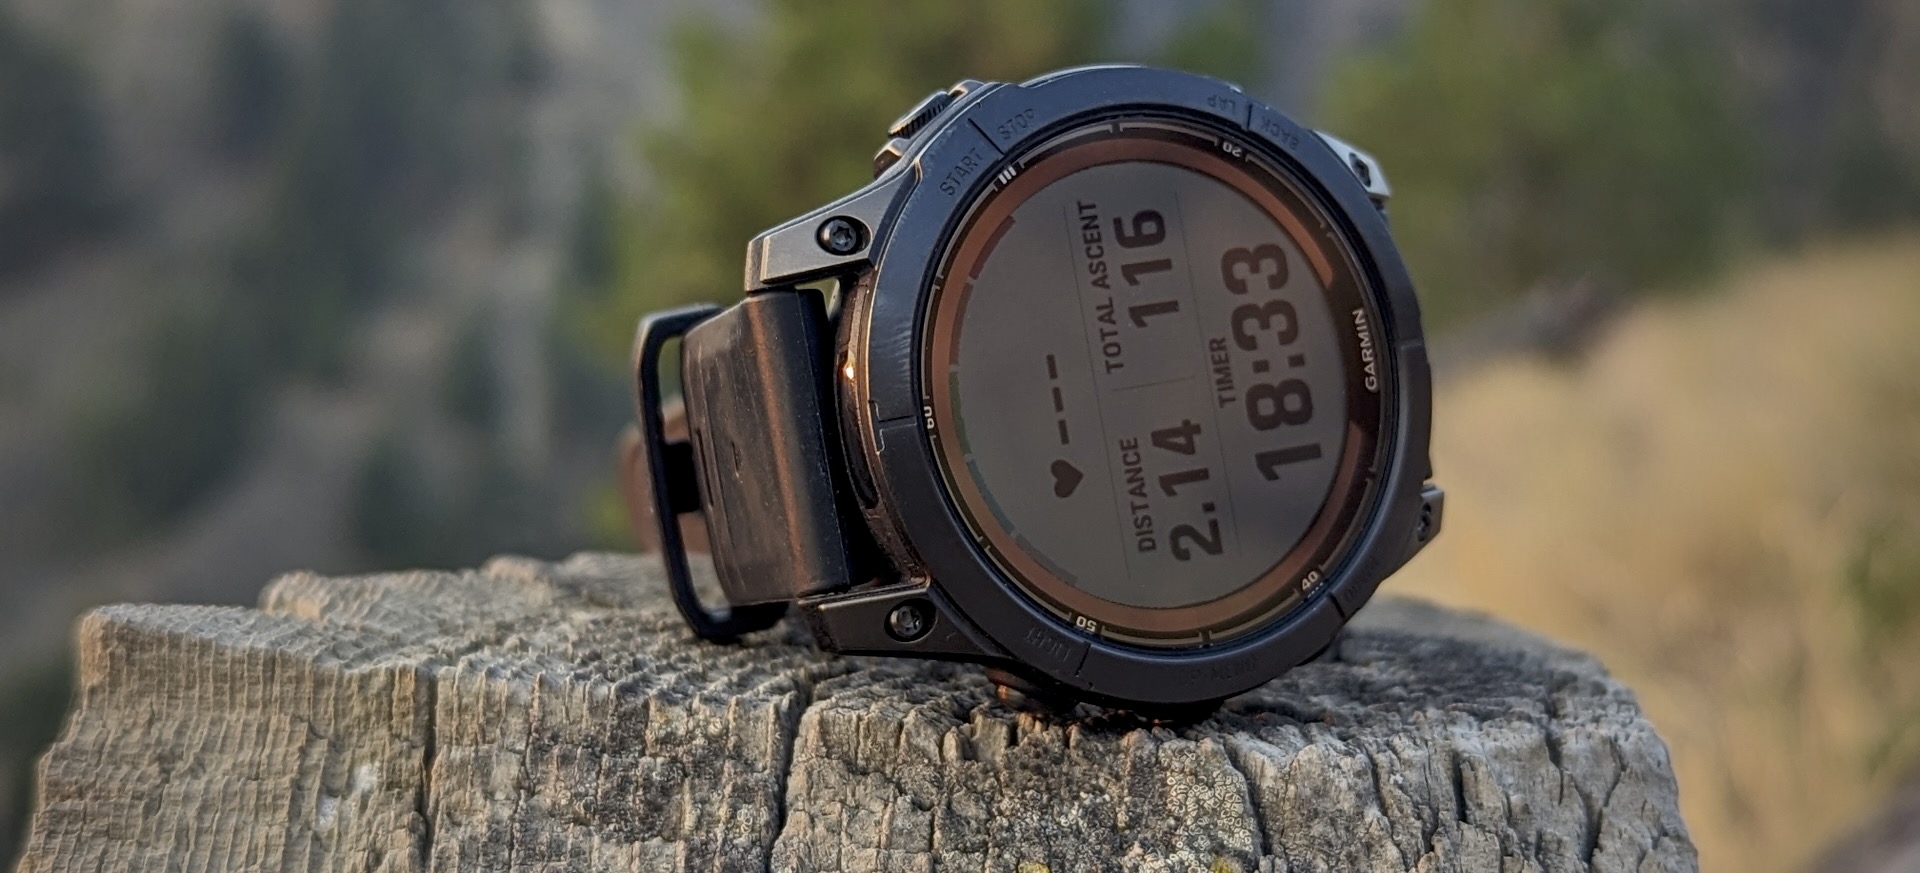 Garmin Fenix 6 heart rate measurement accuracy tested in new study